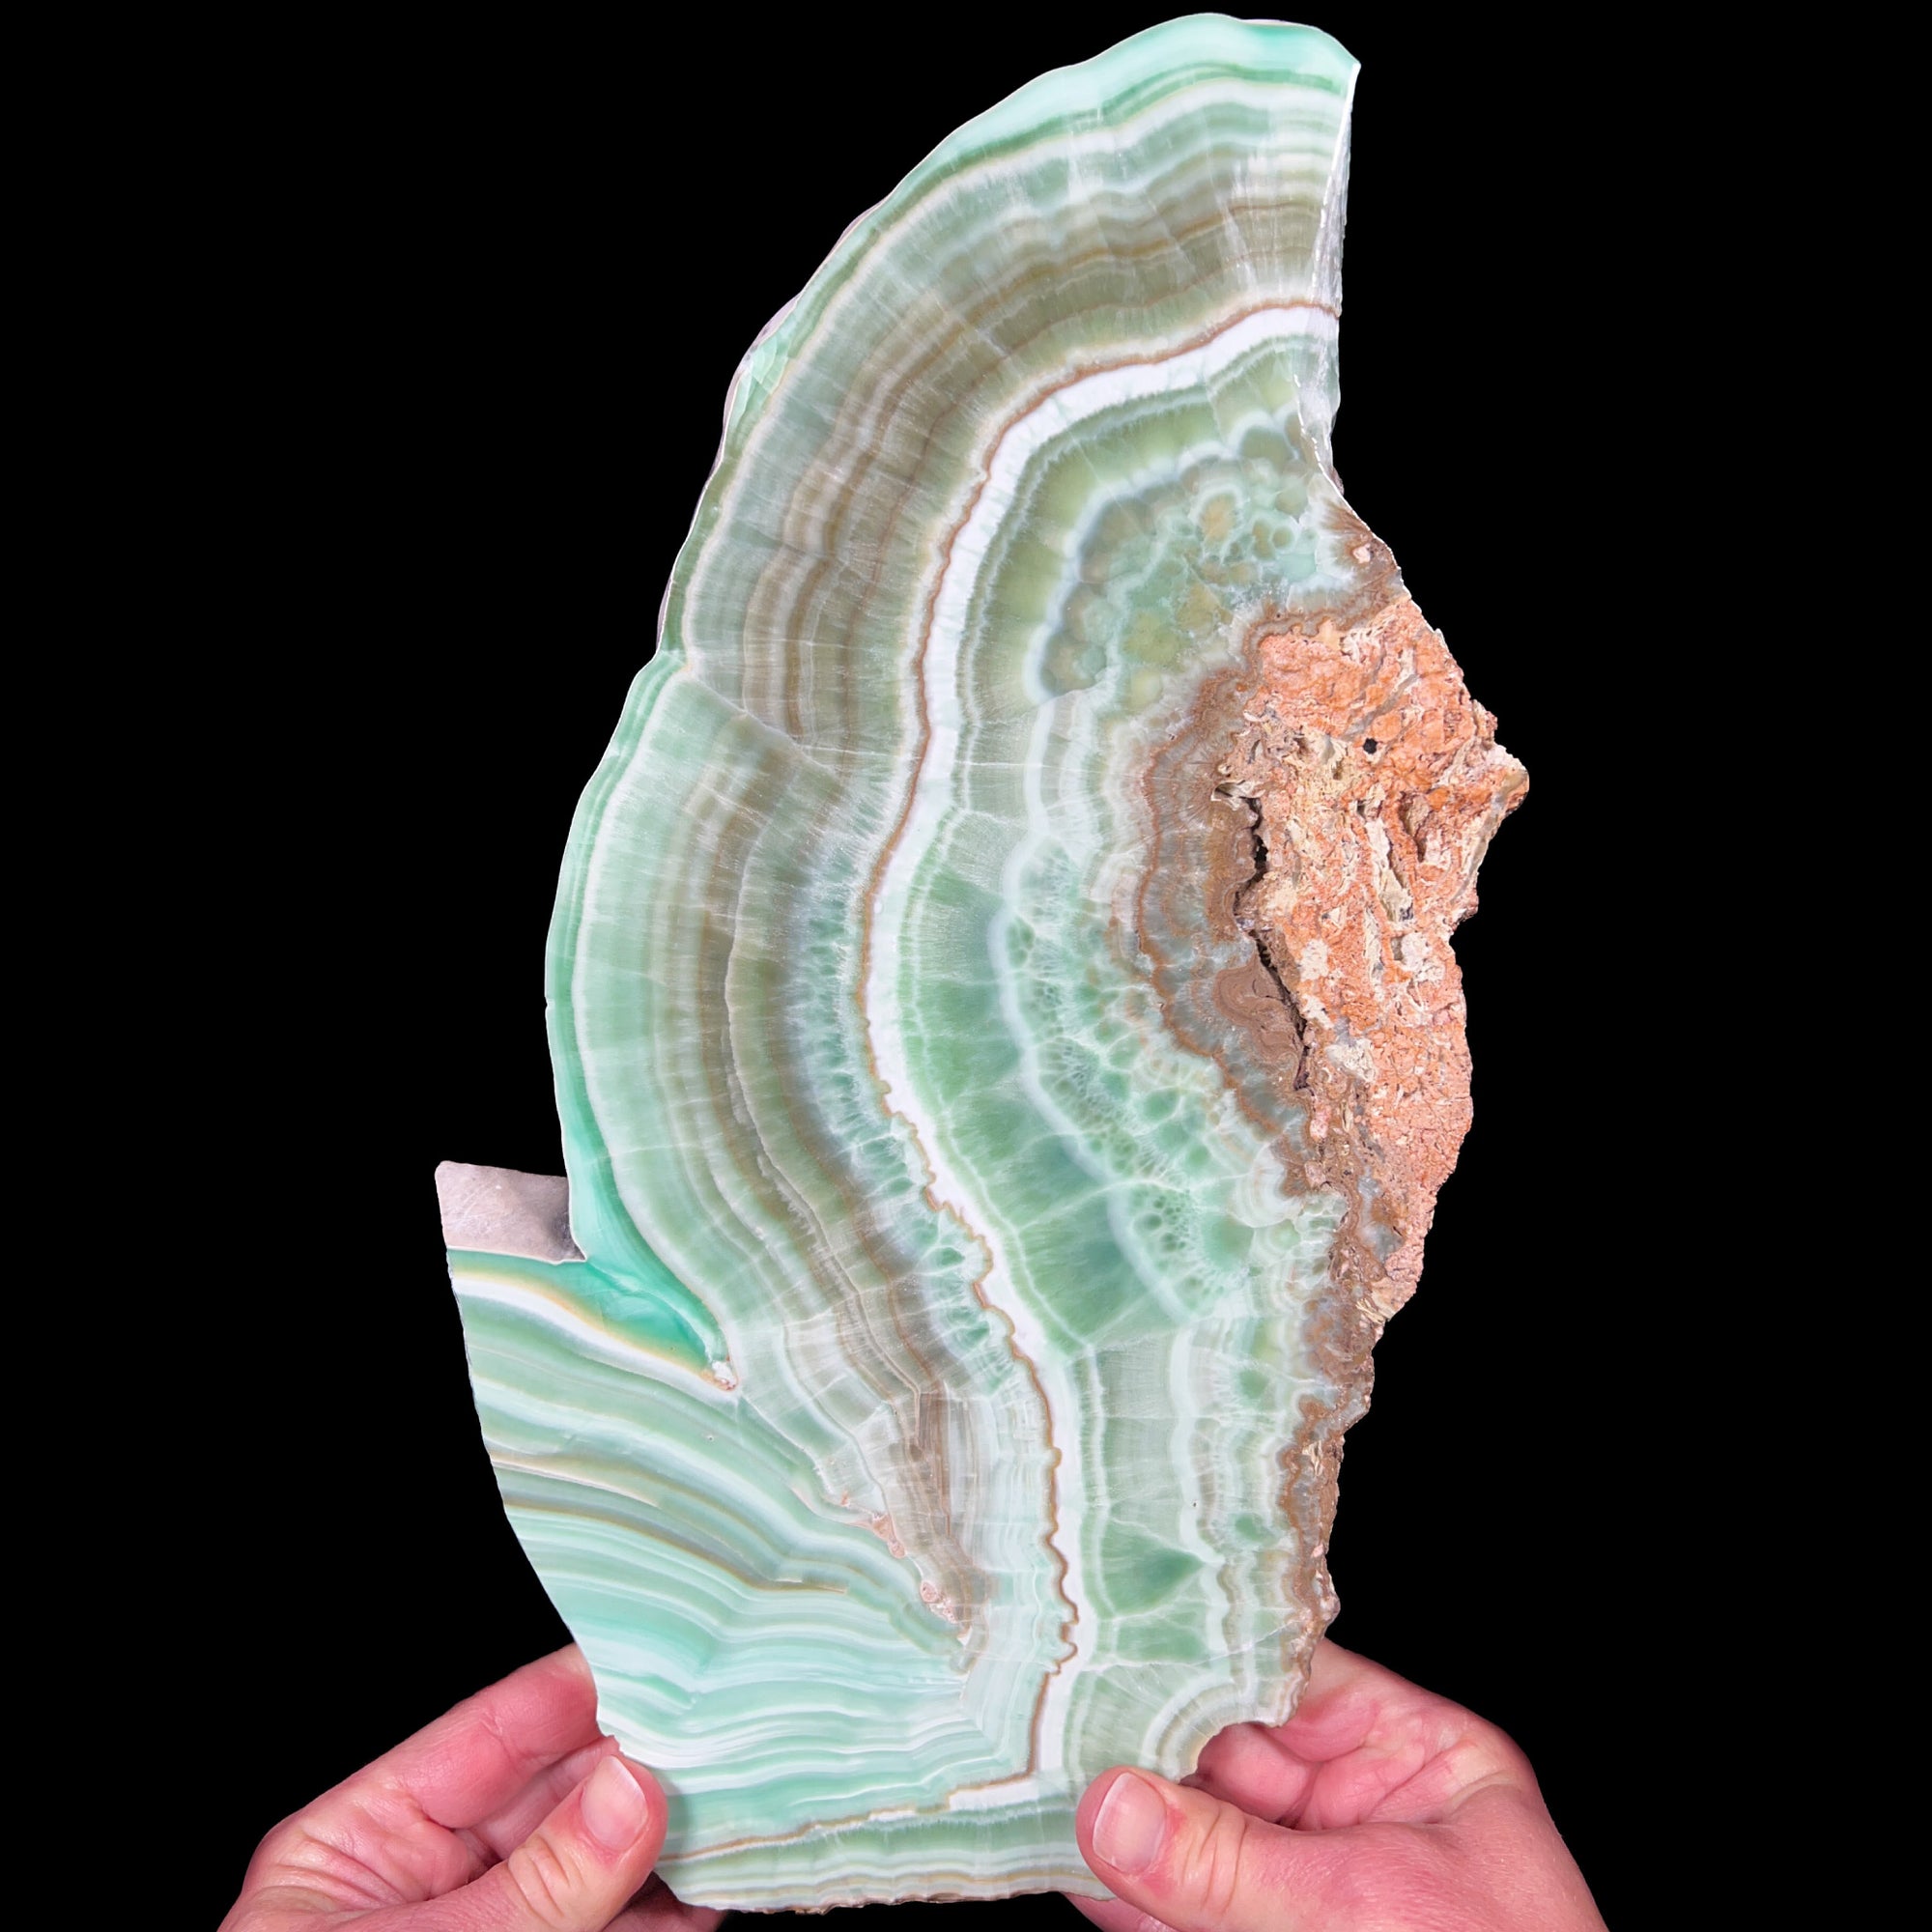 Copper-infused Green Aragonite Slice from Spain